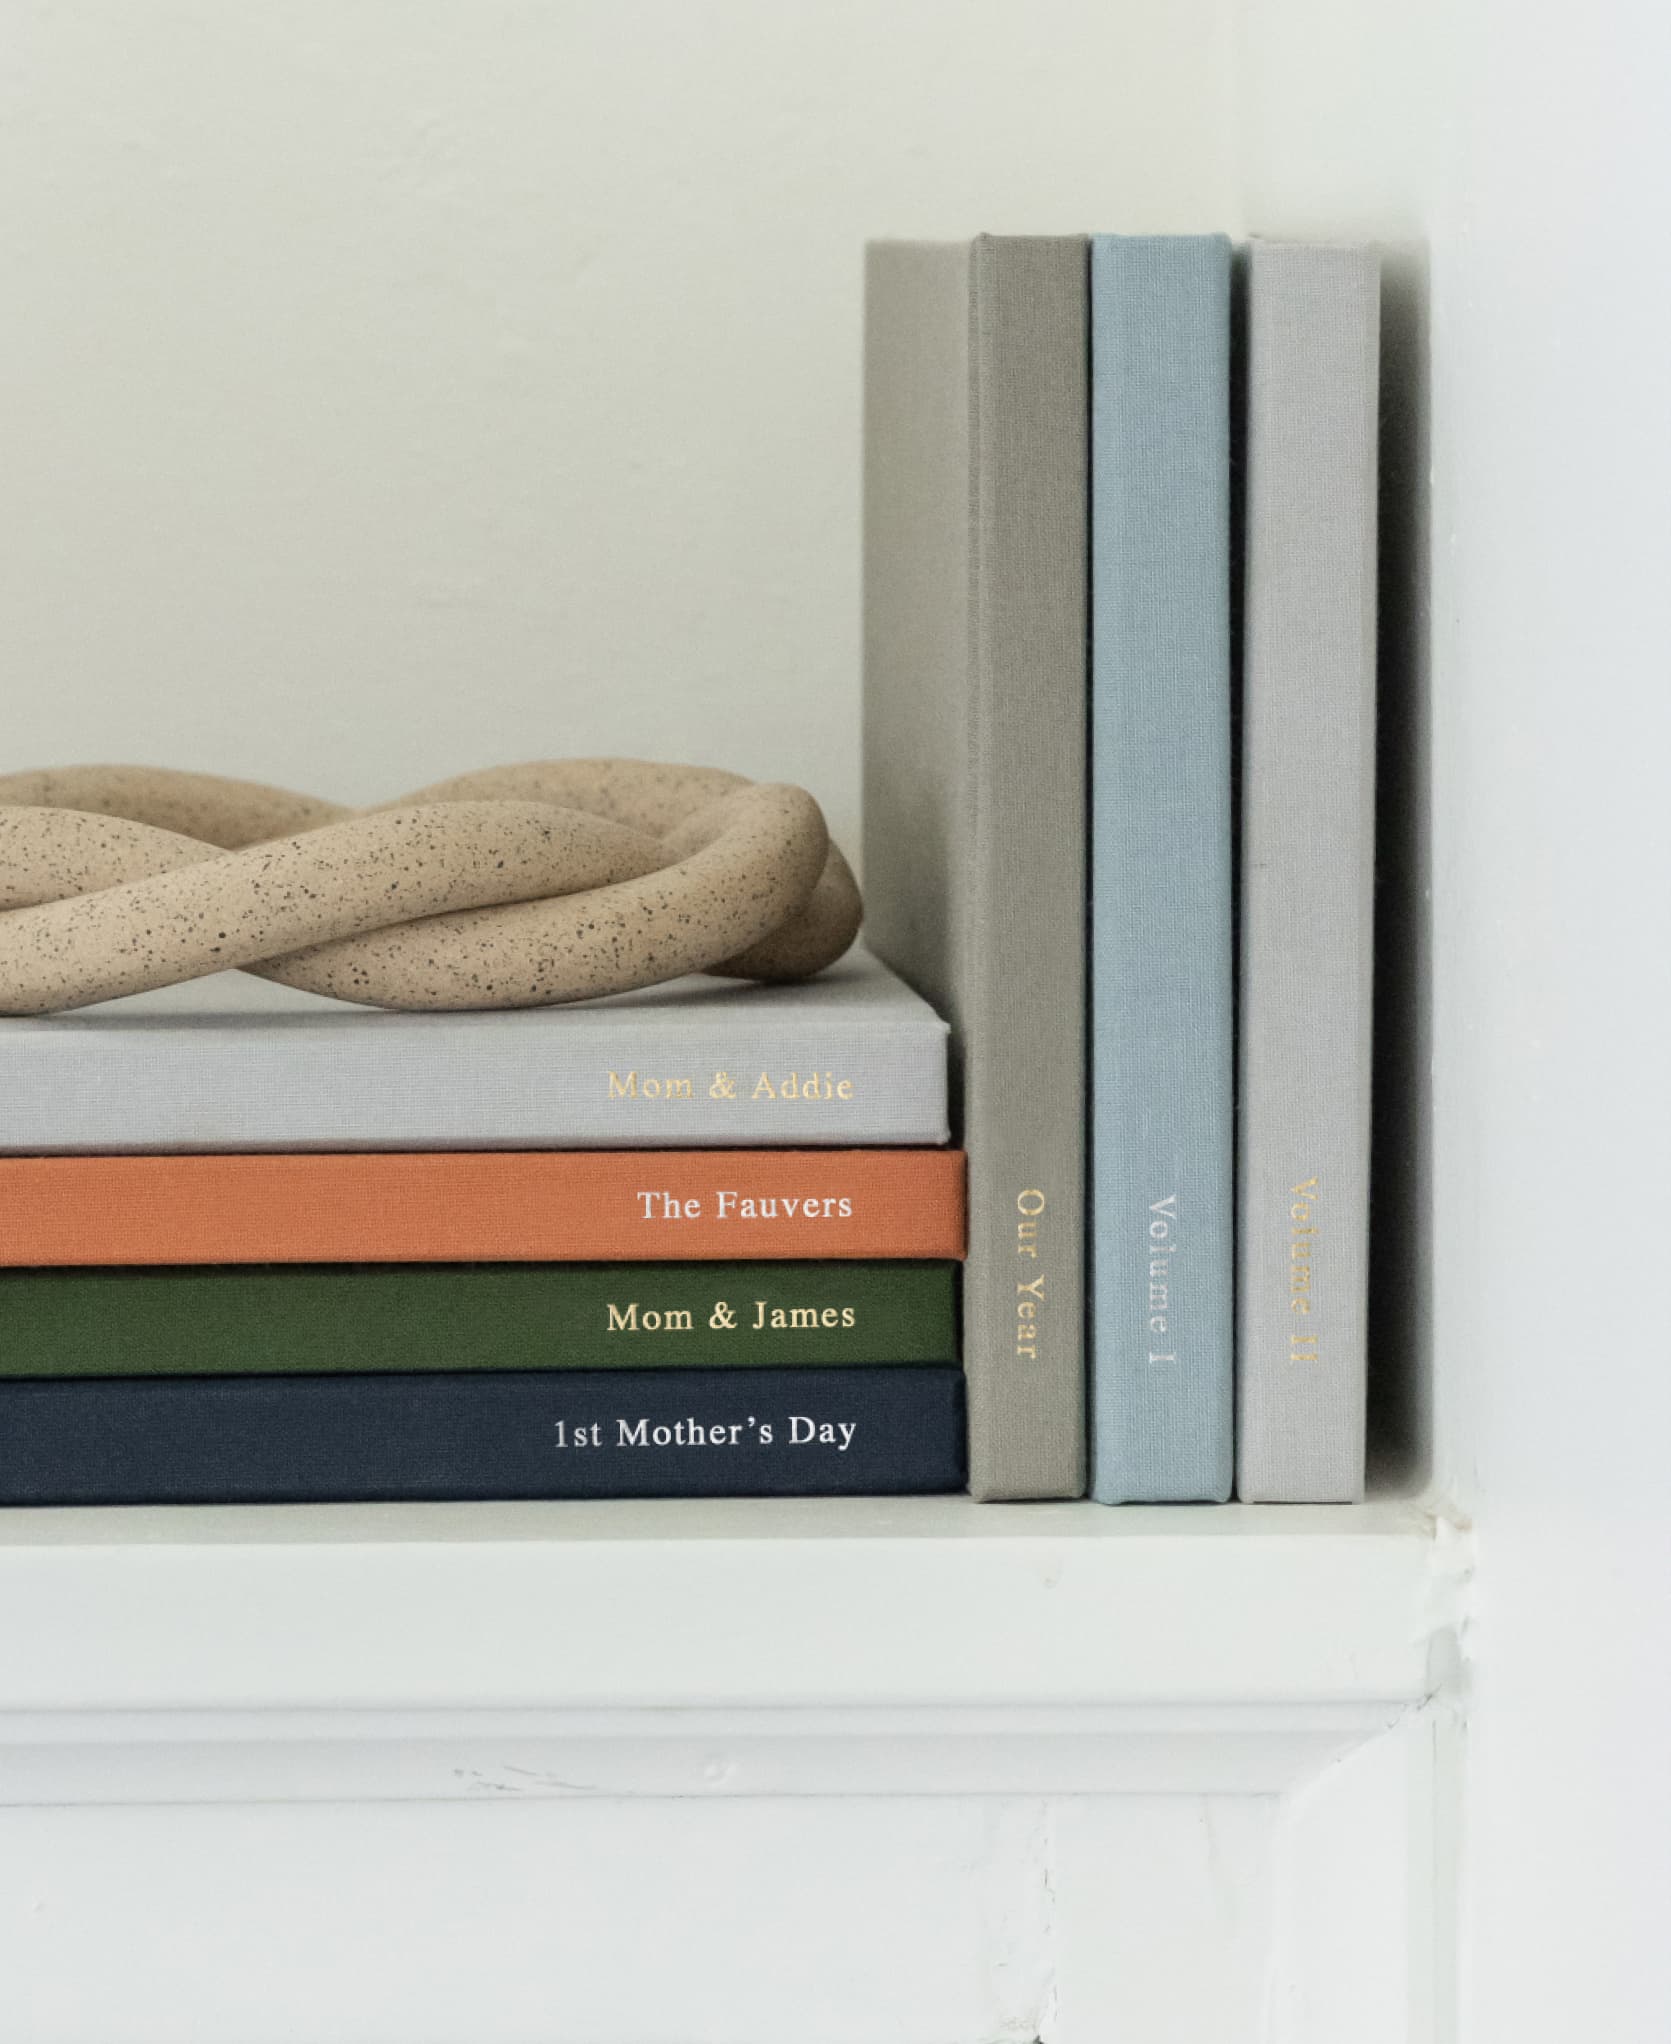 Everyday Photo Books stack in shelf on display